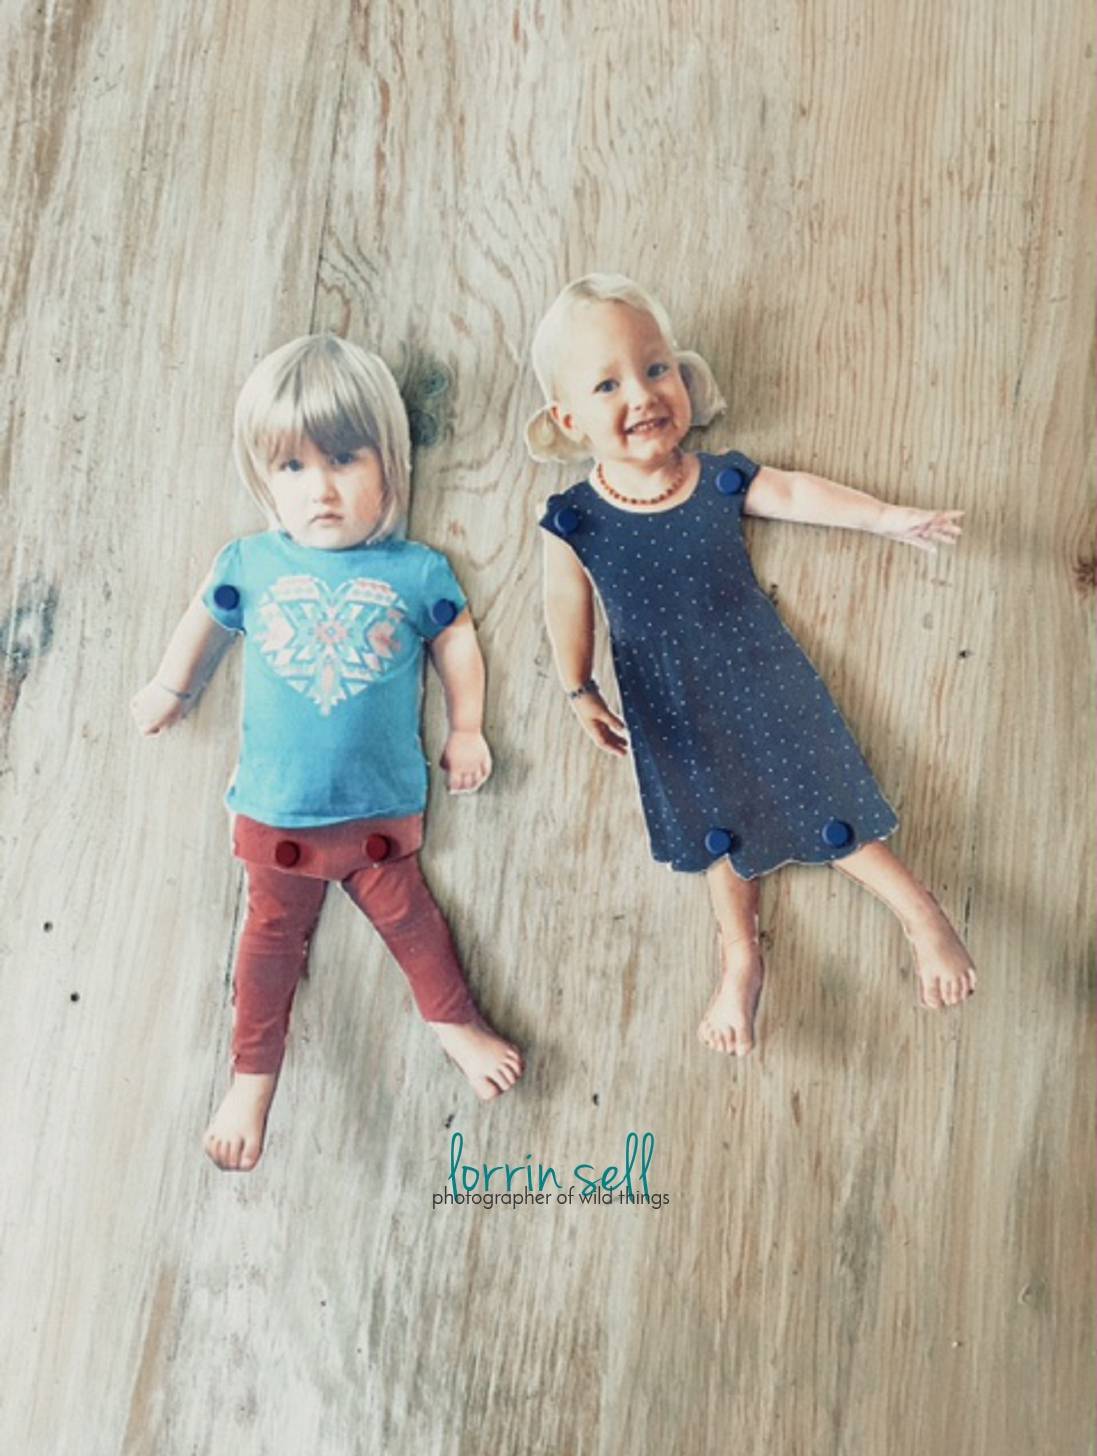 These DIY paper dolls were so easy to make, and the girls LOVE the fact that they have dolls that look JUST like them! I love an easy photo craft